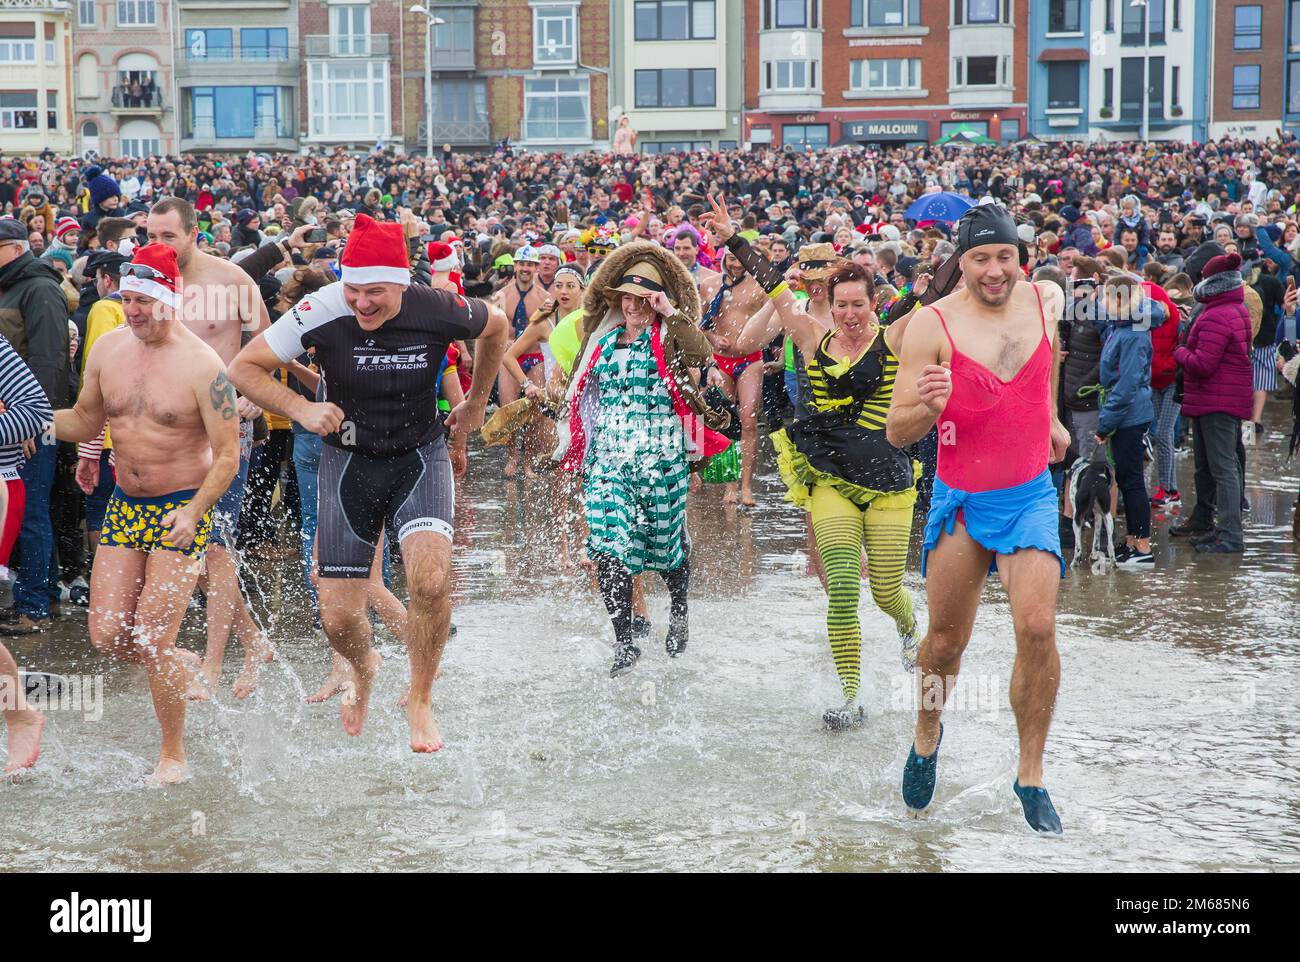 People taking part in the traditional 'Bain de Givres' as part of the New Year's celebrations on January 1 Stock Photo